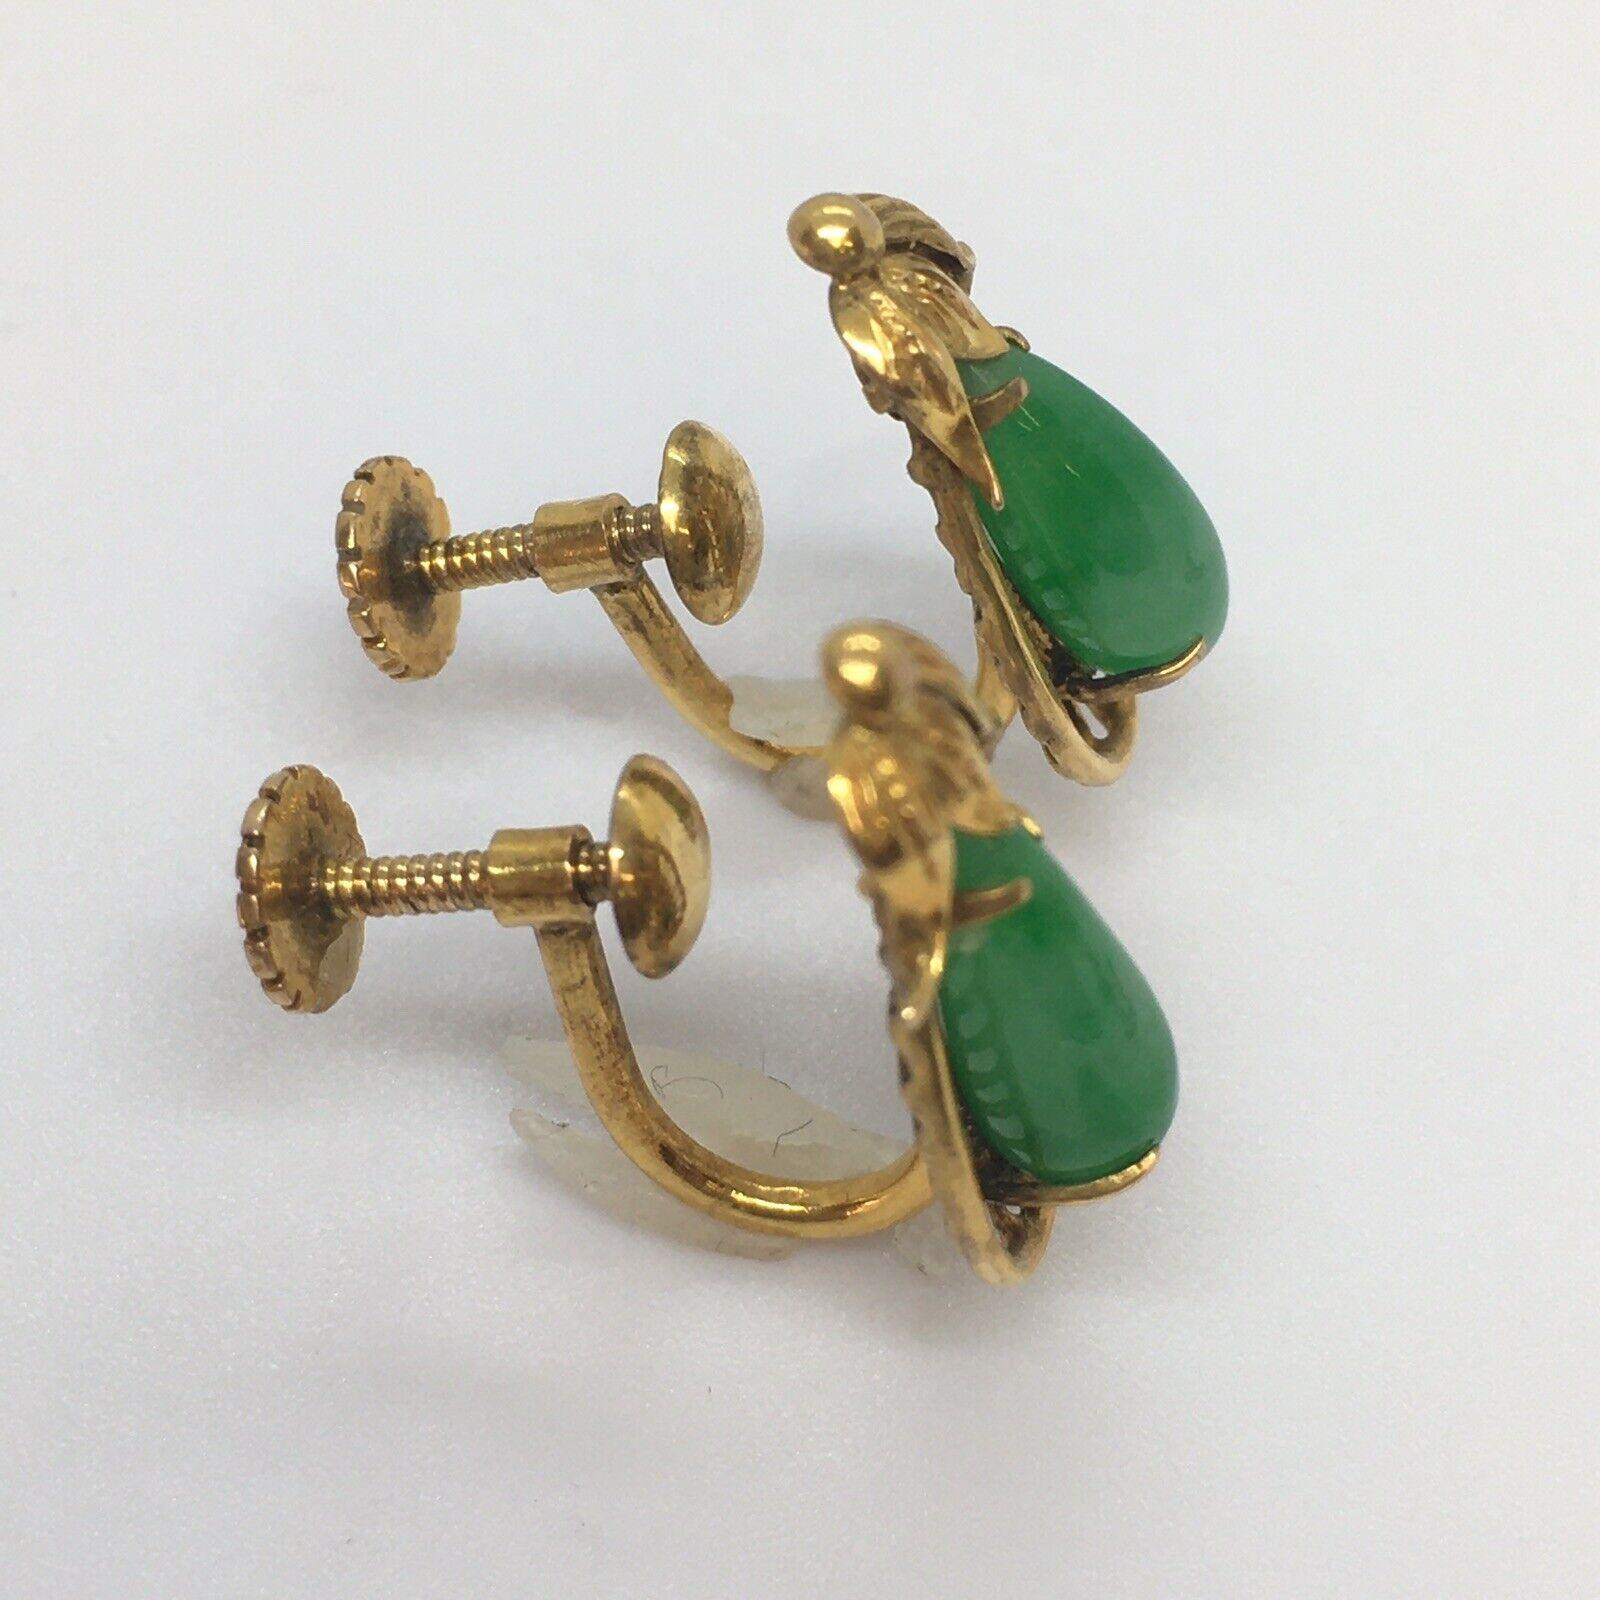 14K Yellow Gold Natural Green Jade  Non Pierced Earrings 1930s Handmade American

Weighting 3.2 gram
17 mm or 1/2 inch long 6.5mm or 1/4 inch wide
Marked screw back
Art Deco circa 1920s
American made